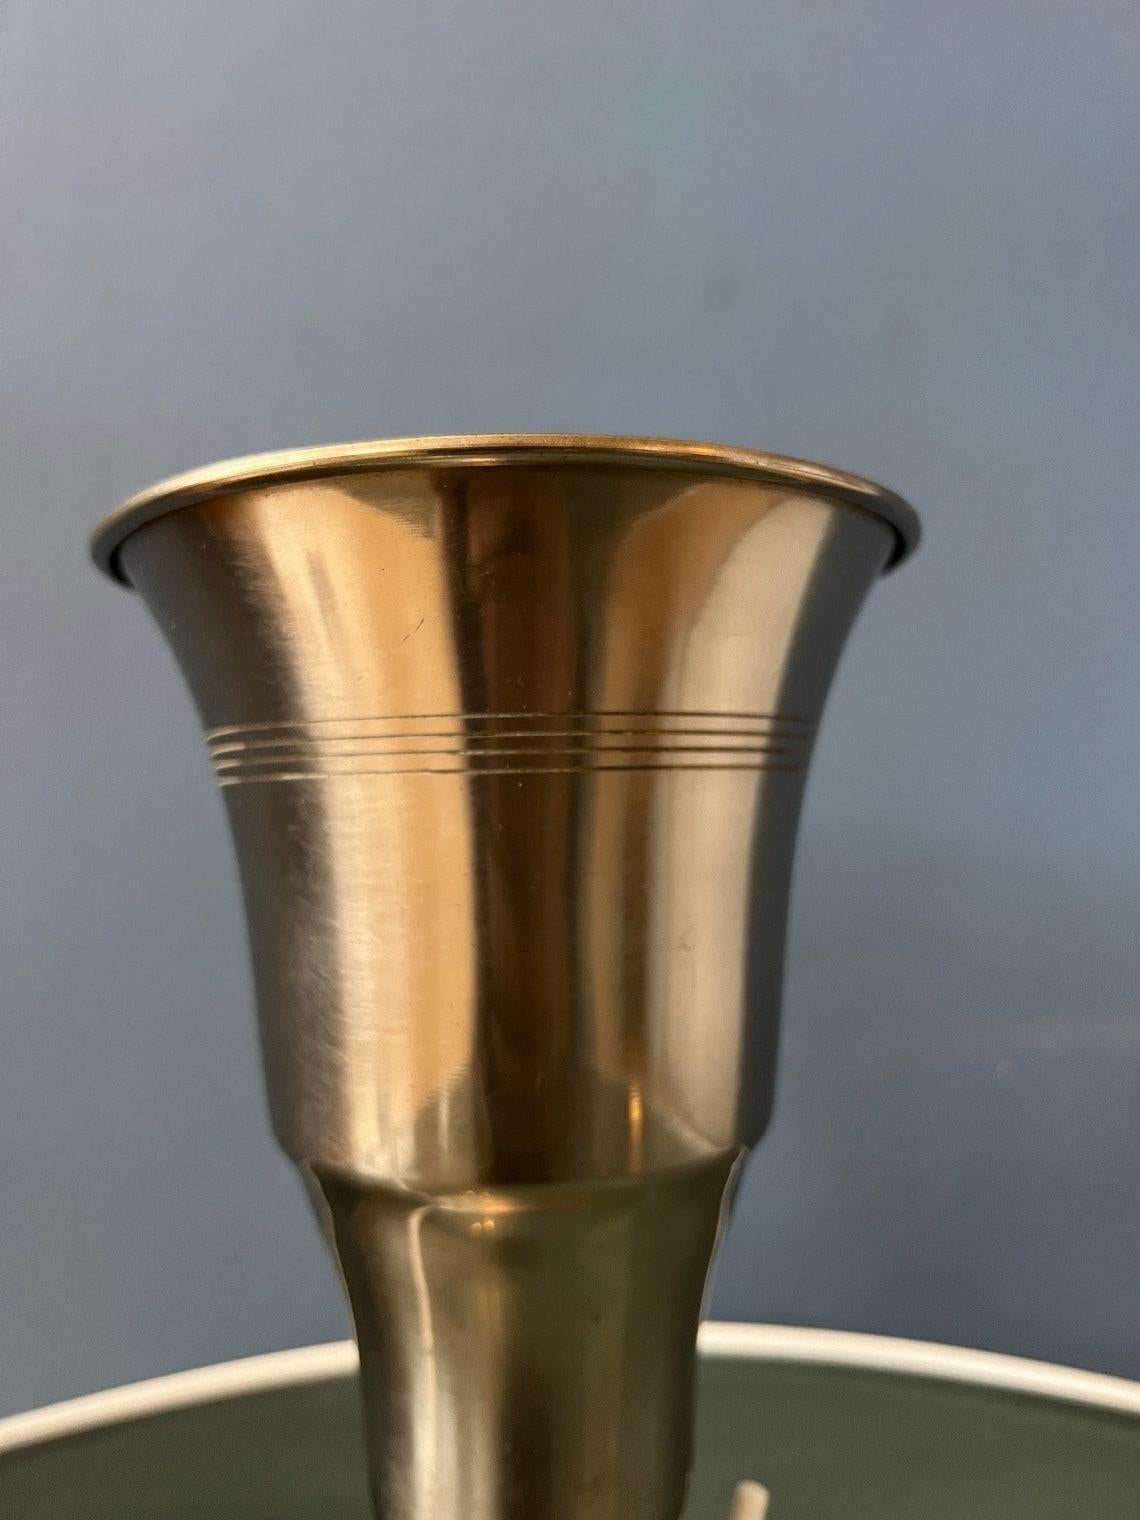 Metal Trumpet Uplighter 'Cup' Table Lamp in Silver Colour, 1970s For Sale 5